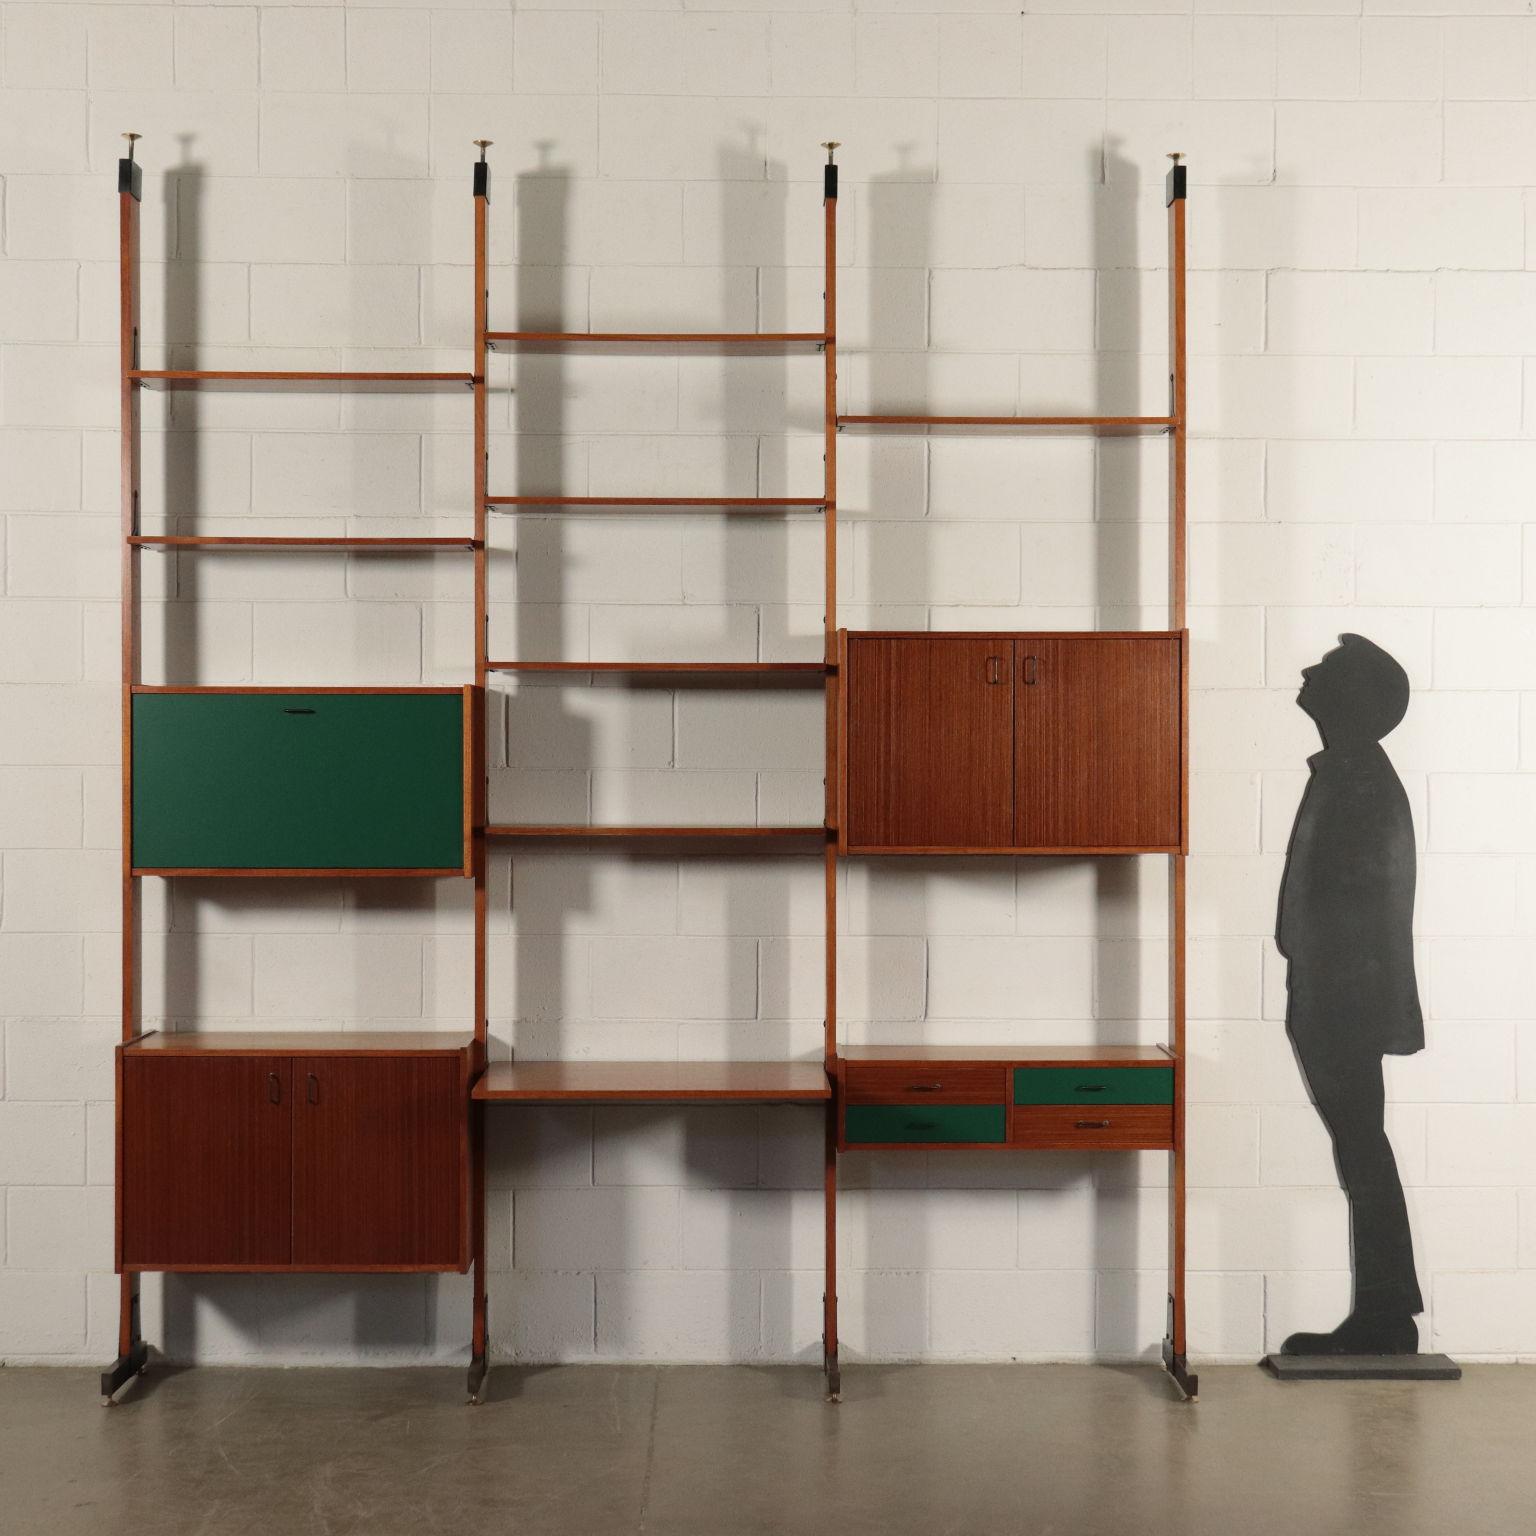 Celing bookcase with adjustable elements, teak veneered wood with fformica inserts, metal and brass legs and ending parts.